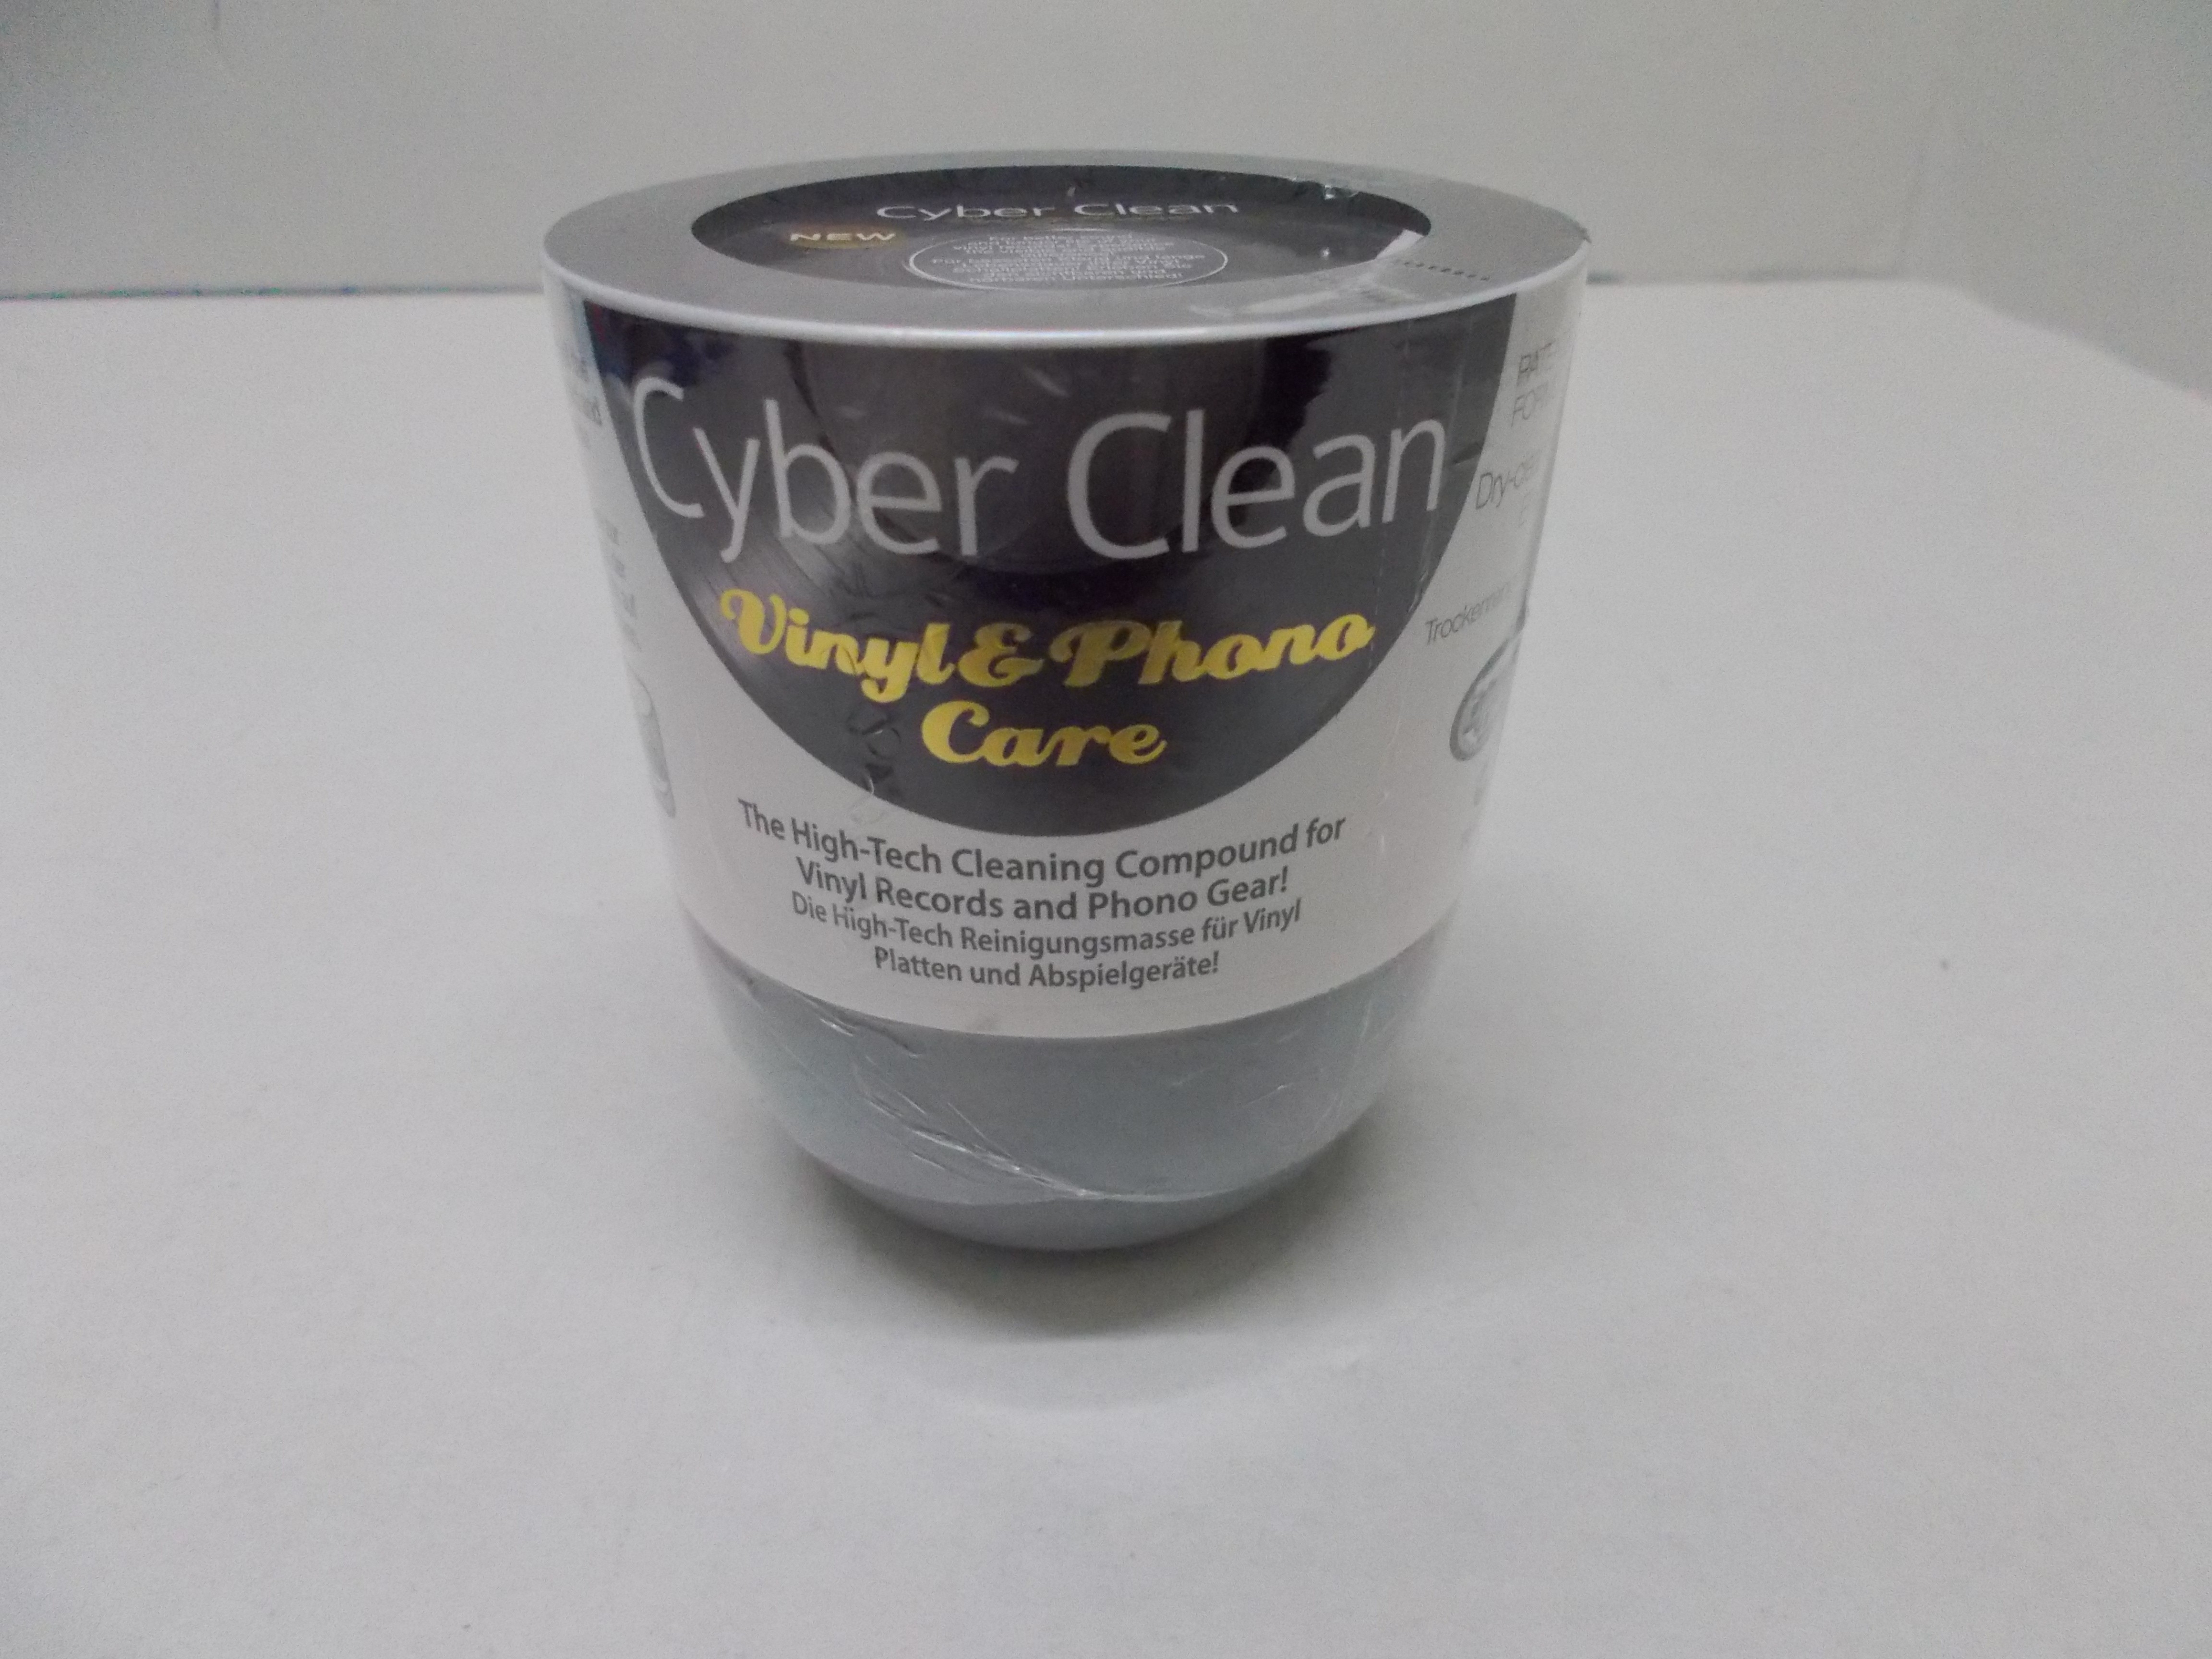 Music Protection - Cyber Clean  (Vinyl & Phono Care)